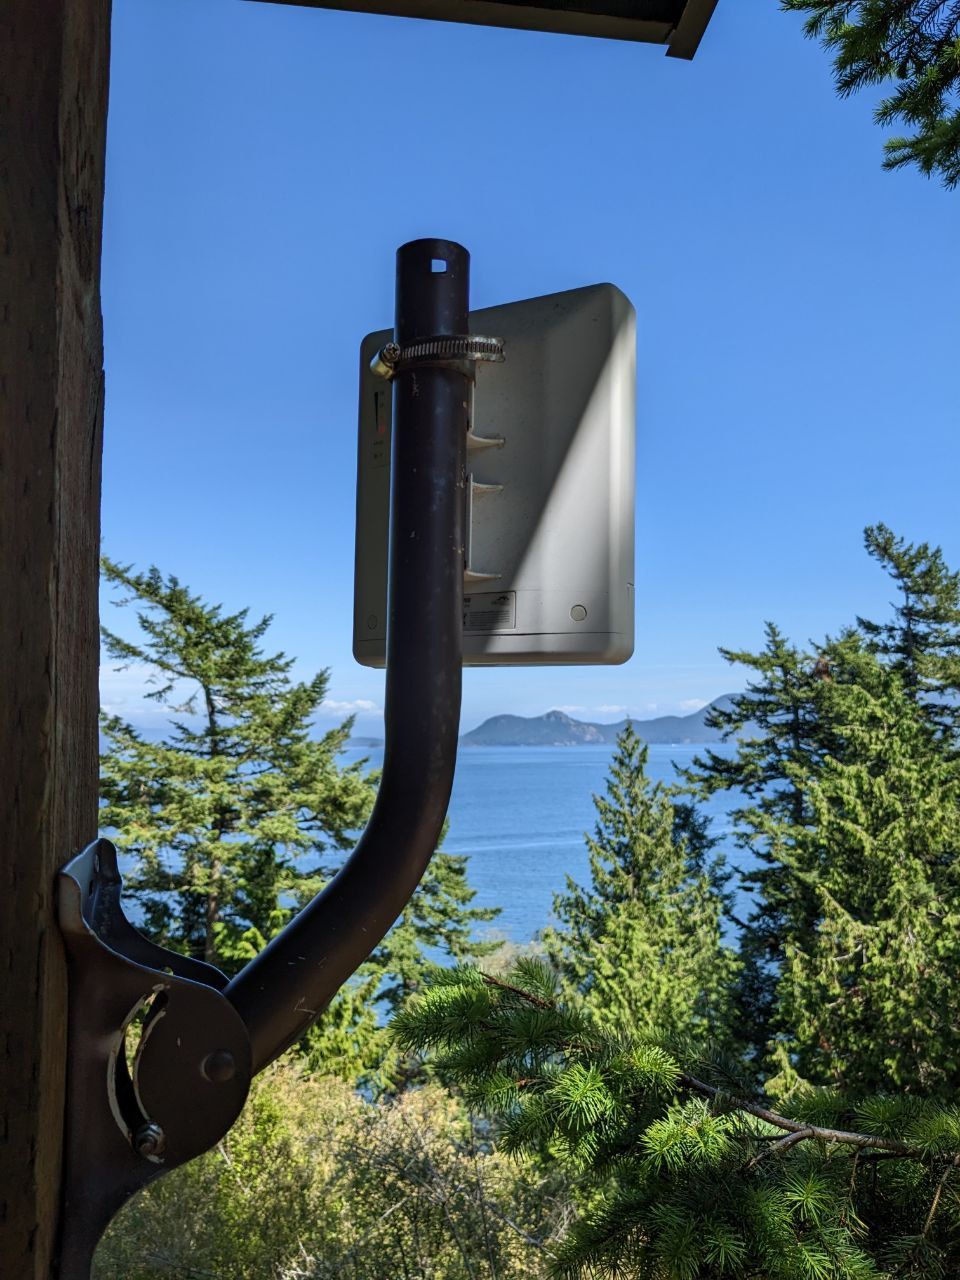 A photo of a wireless point to point radio, with Washington mountains and forest in the background